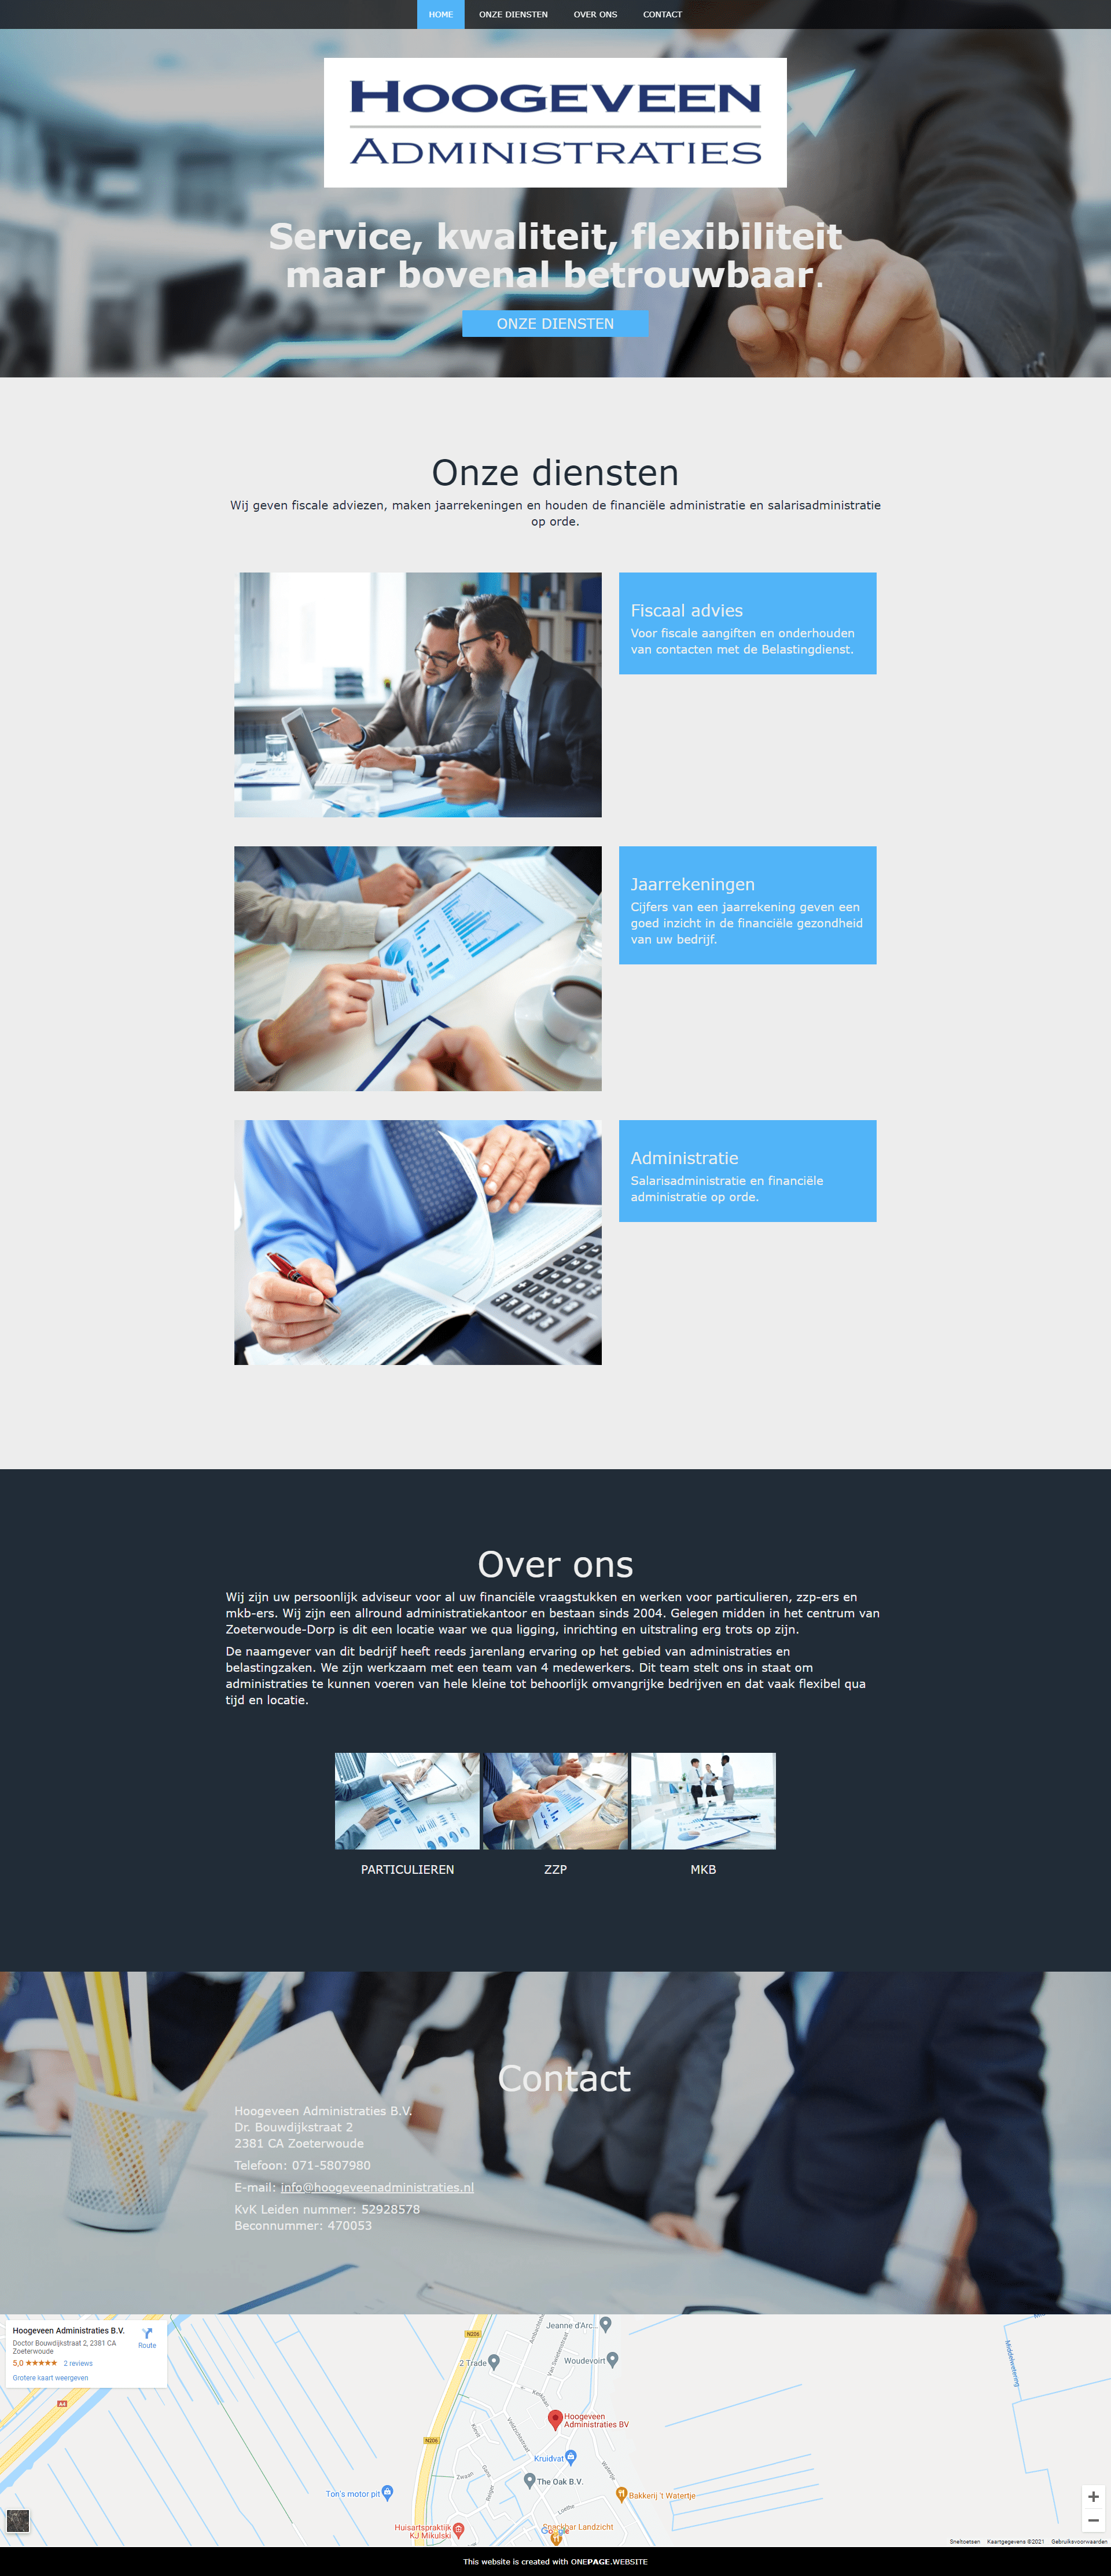 Your one page website